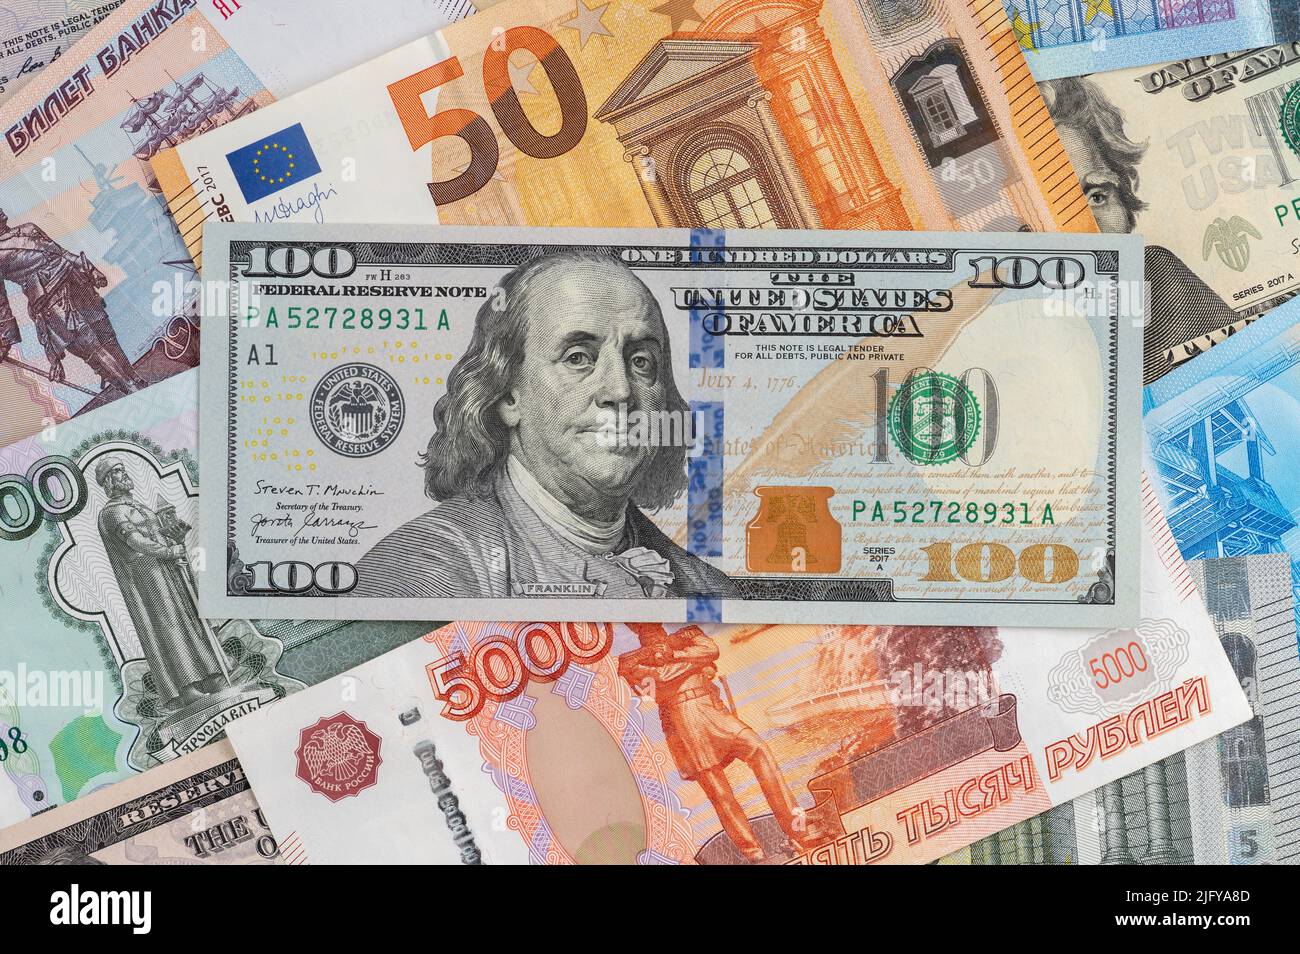 Money background from different countries: dollars, euros, rubles. International currencies. 100 dollars Stock Photo